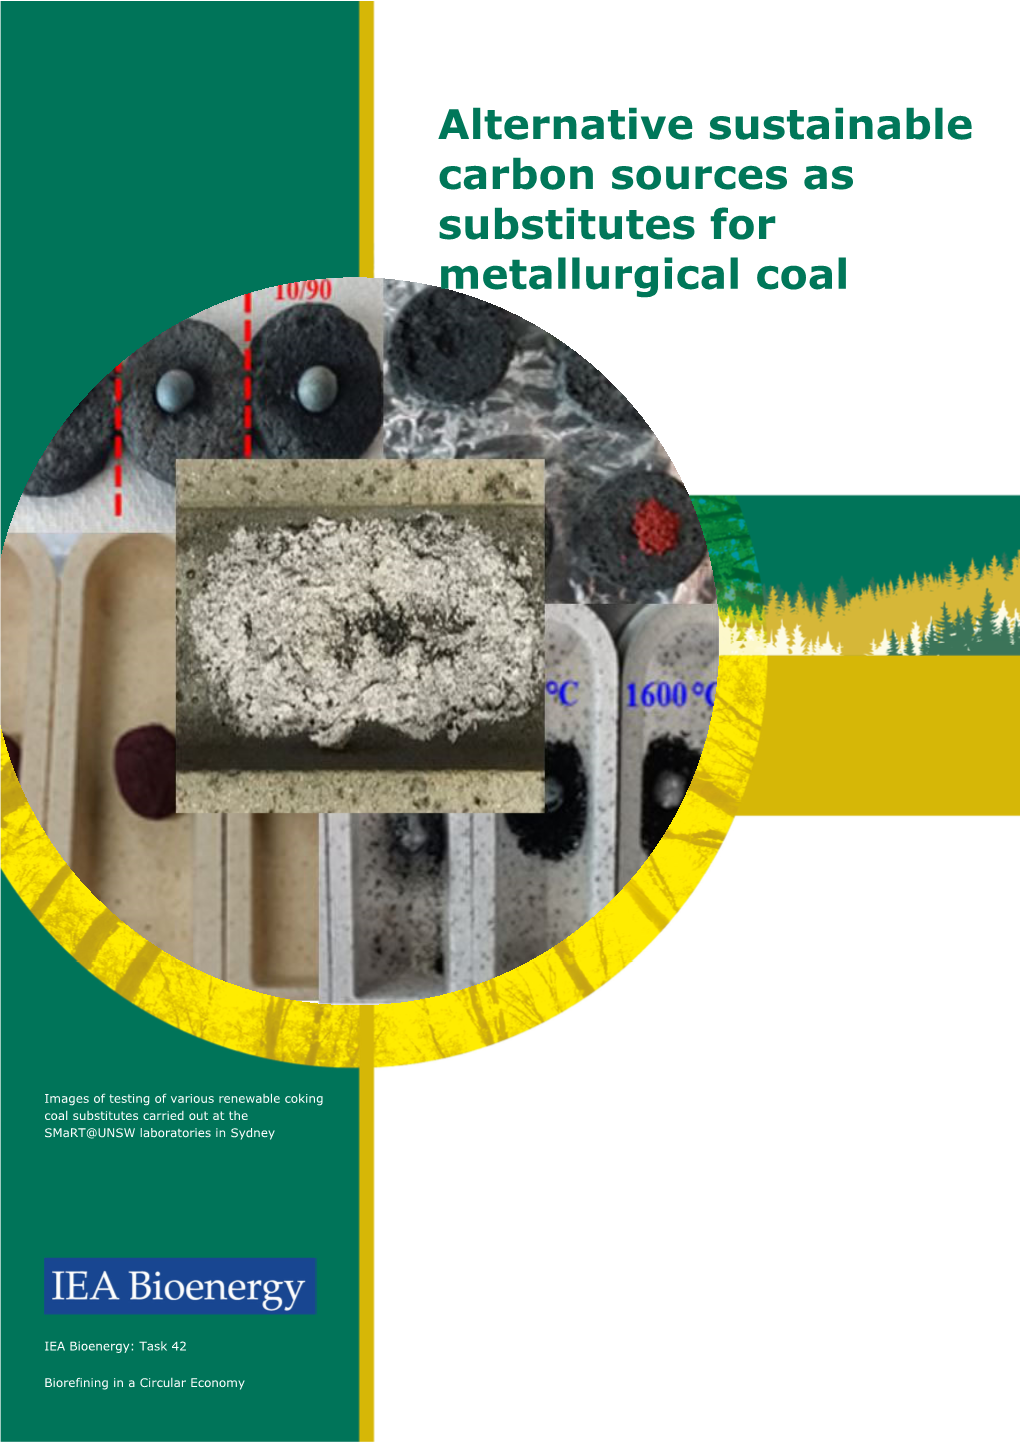 Alternative Sustainable Carbon Sources As Substitutes for Metallurgical Coal